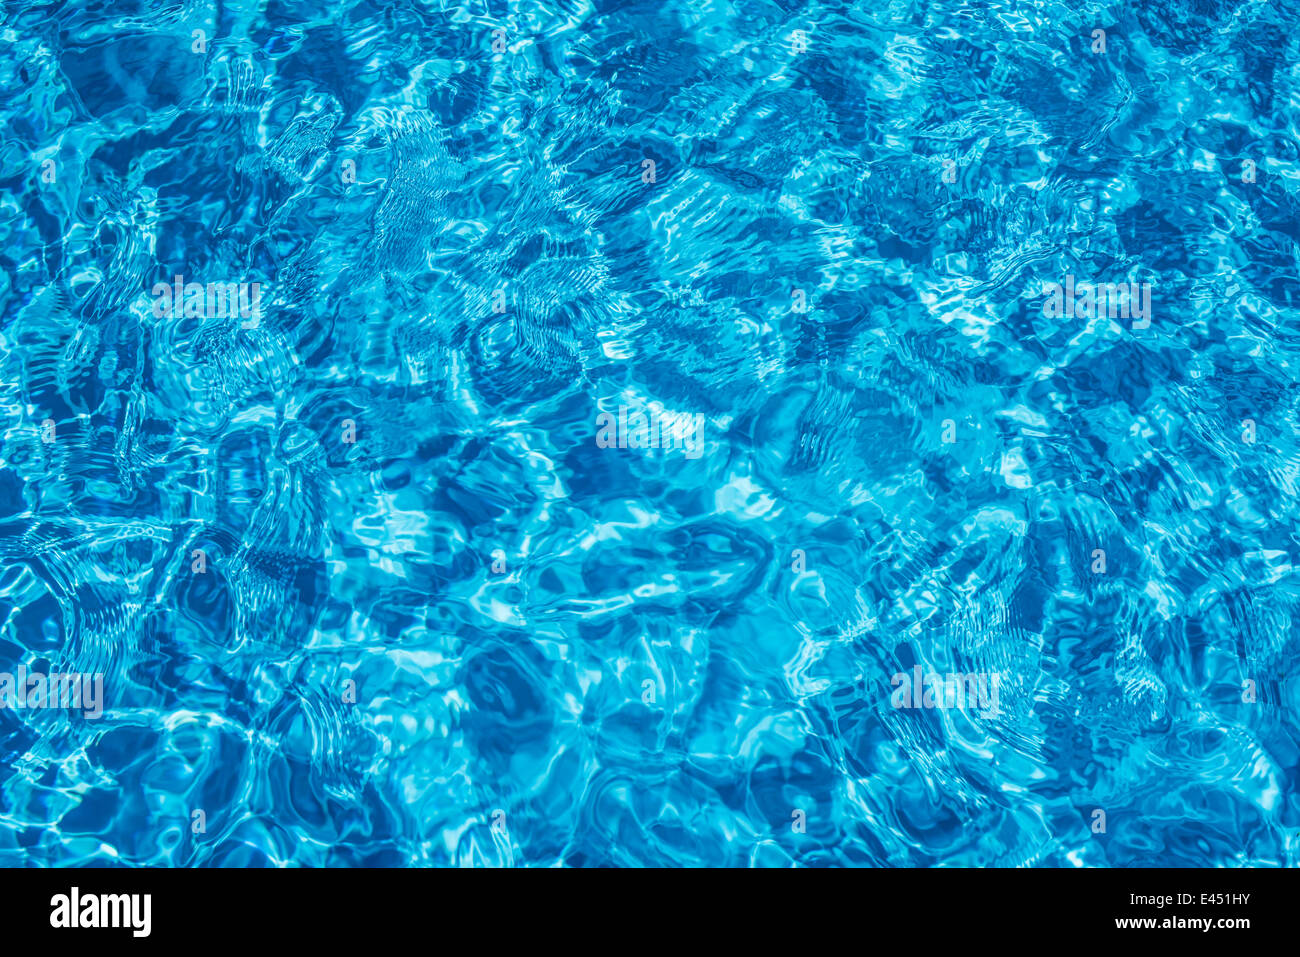 Water surface in a blue swimming pool Stock Photo